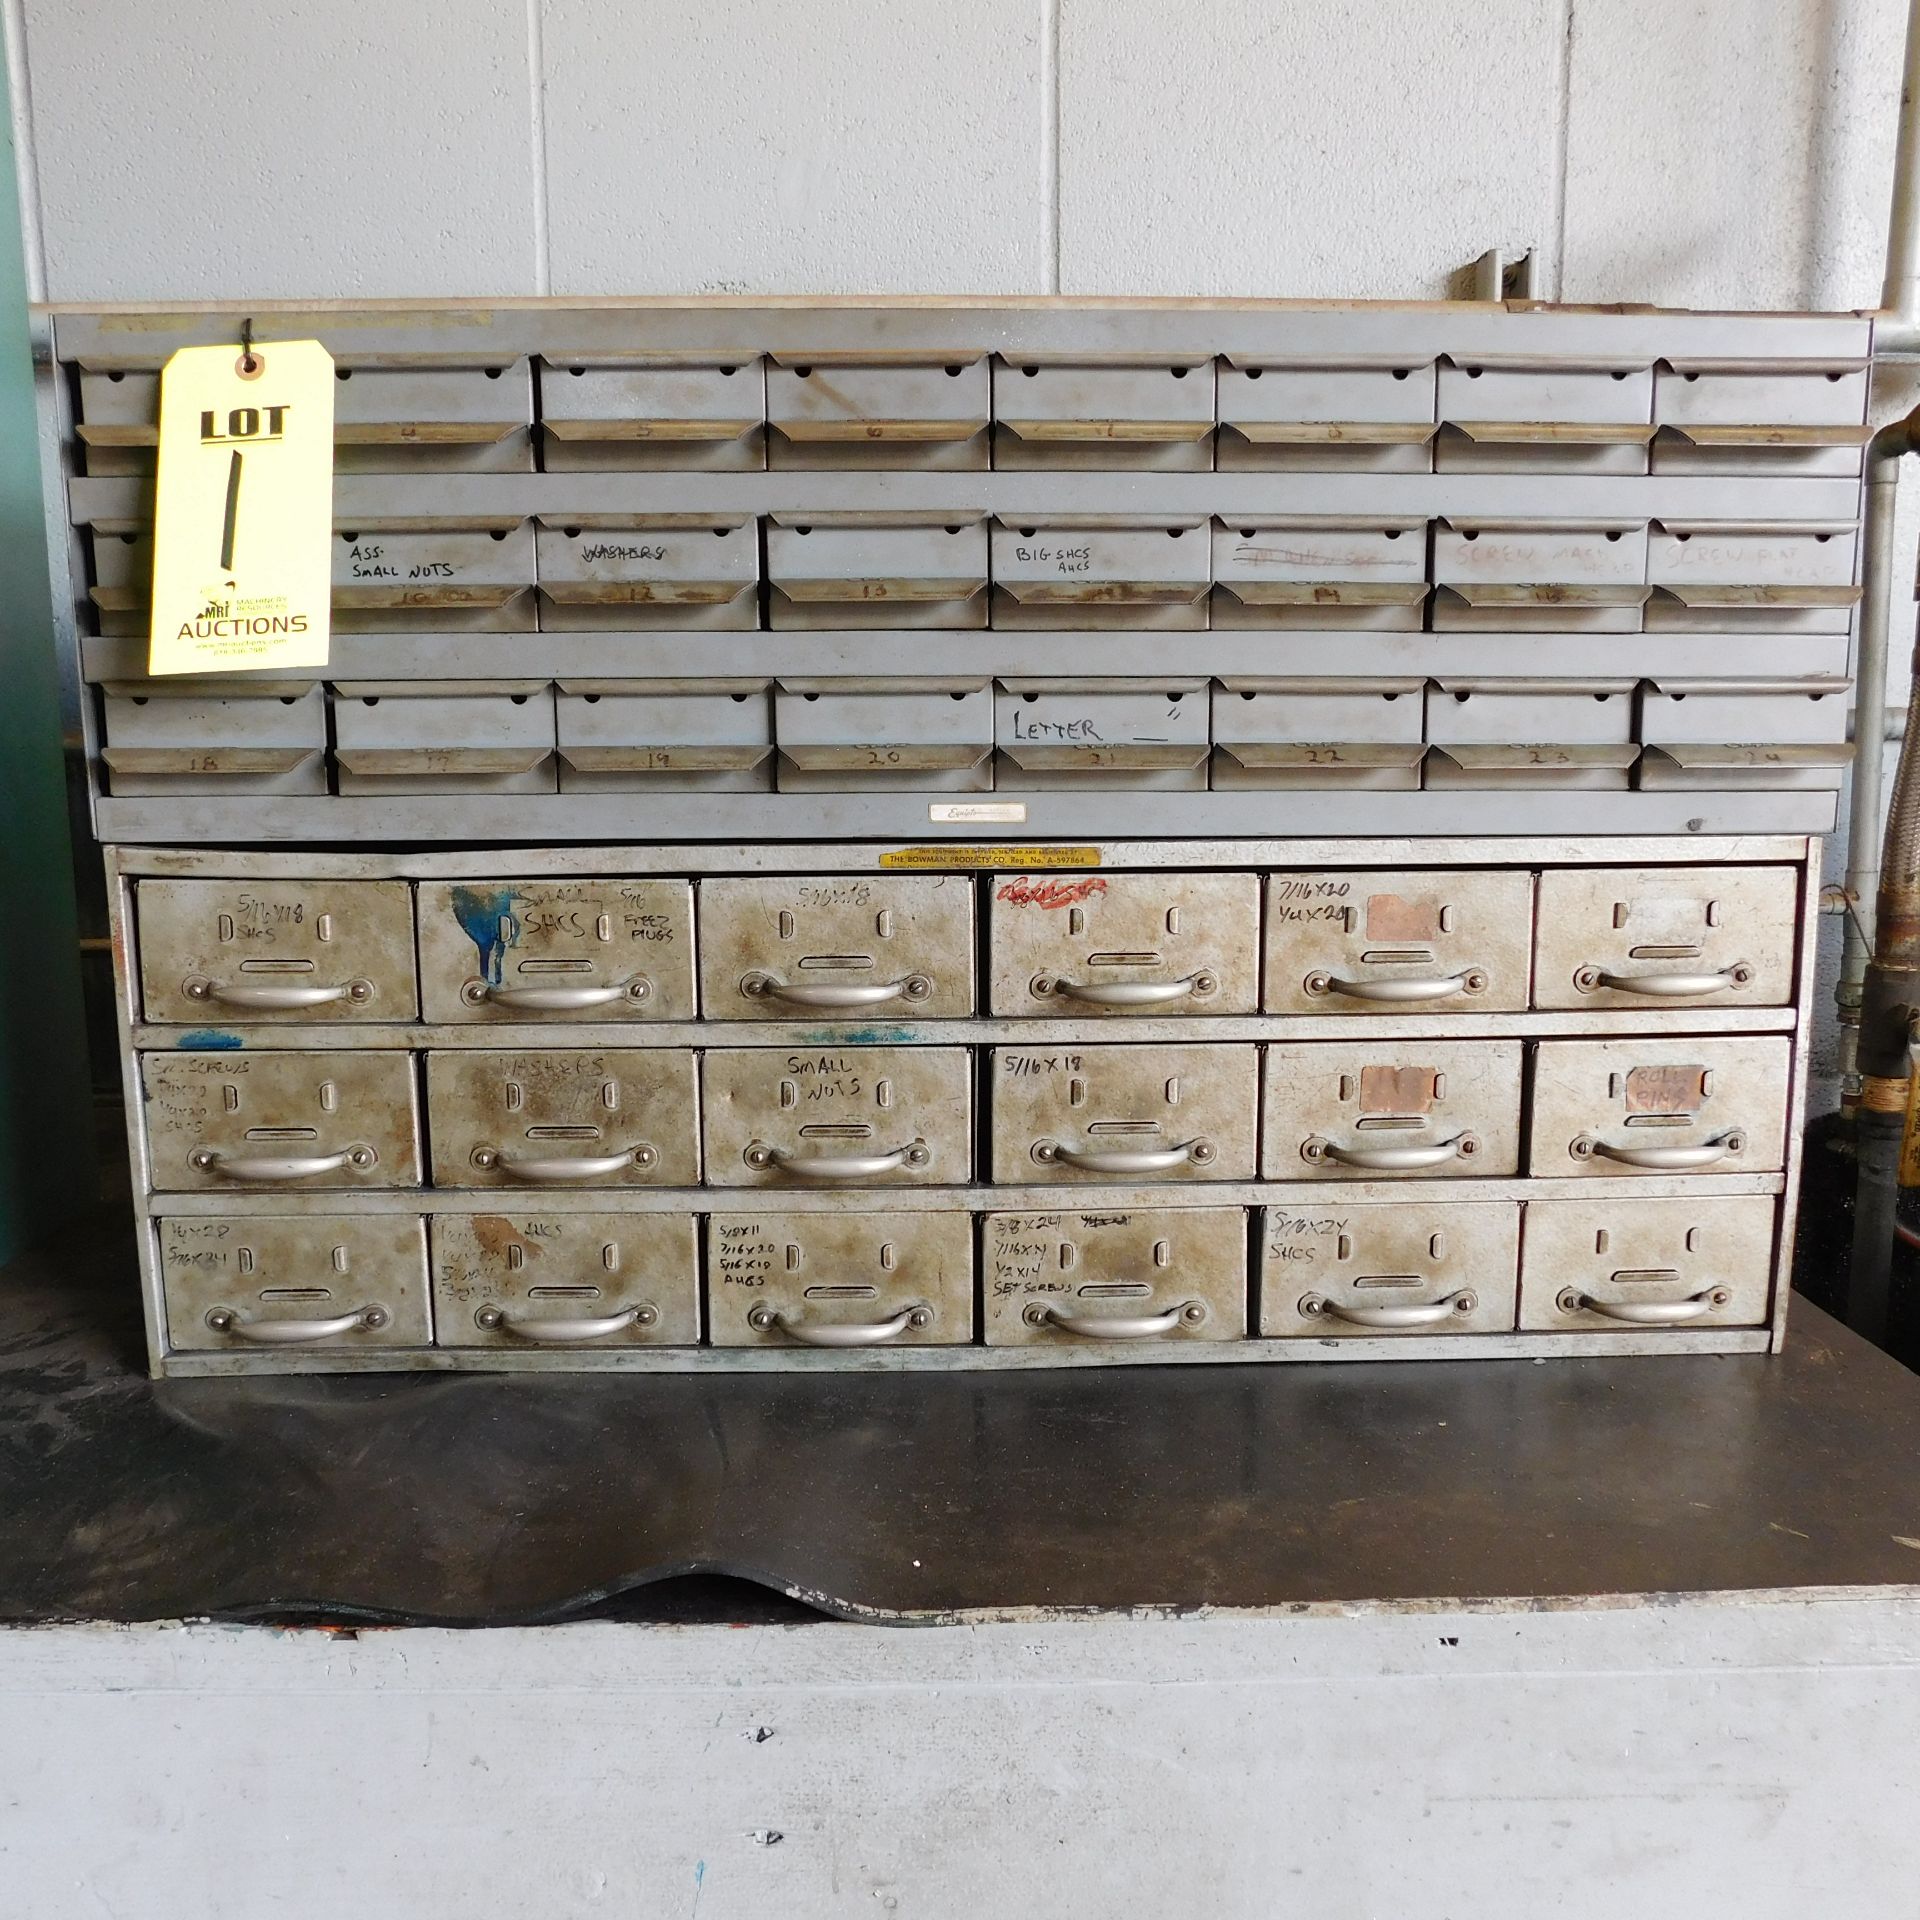 LOT OF (2) STEEL BENCHTOP DRAWER CABINETS WITH CONTENTS OF MACHINE BOLTS, BUSHINGS, & MISC HARDWARE,